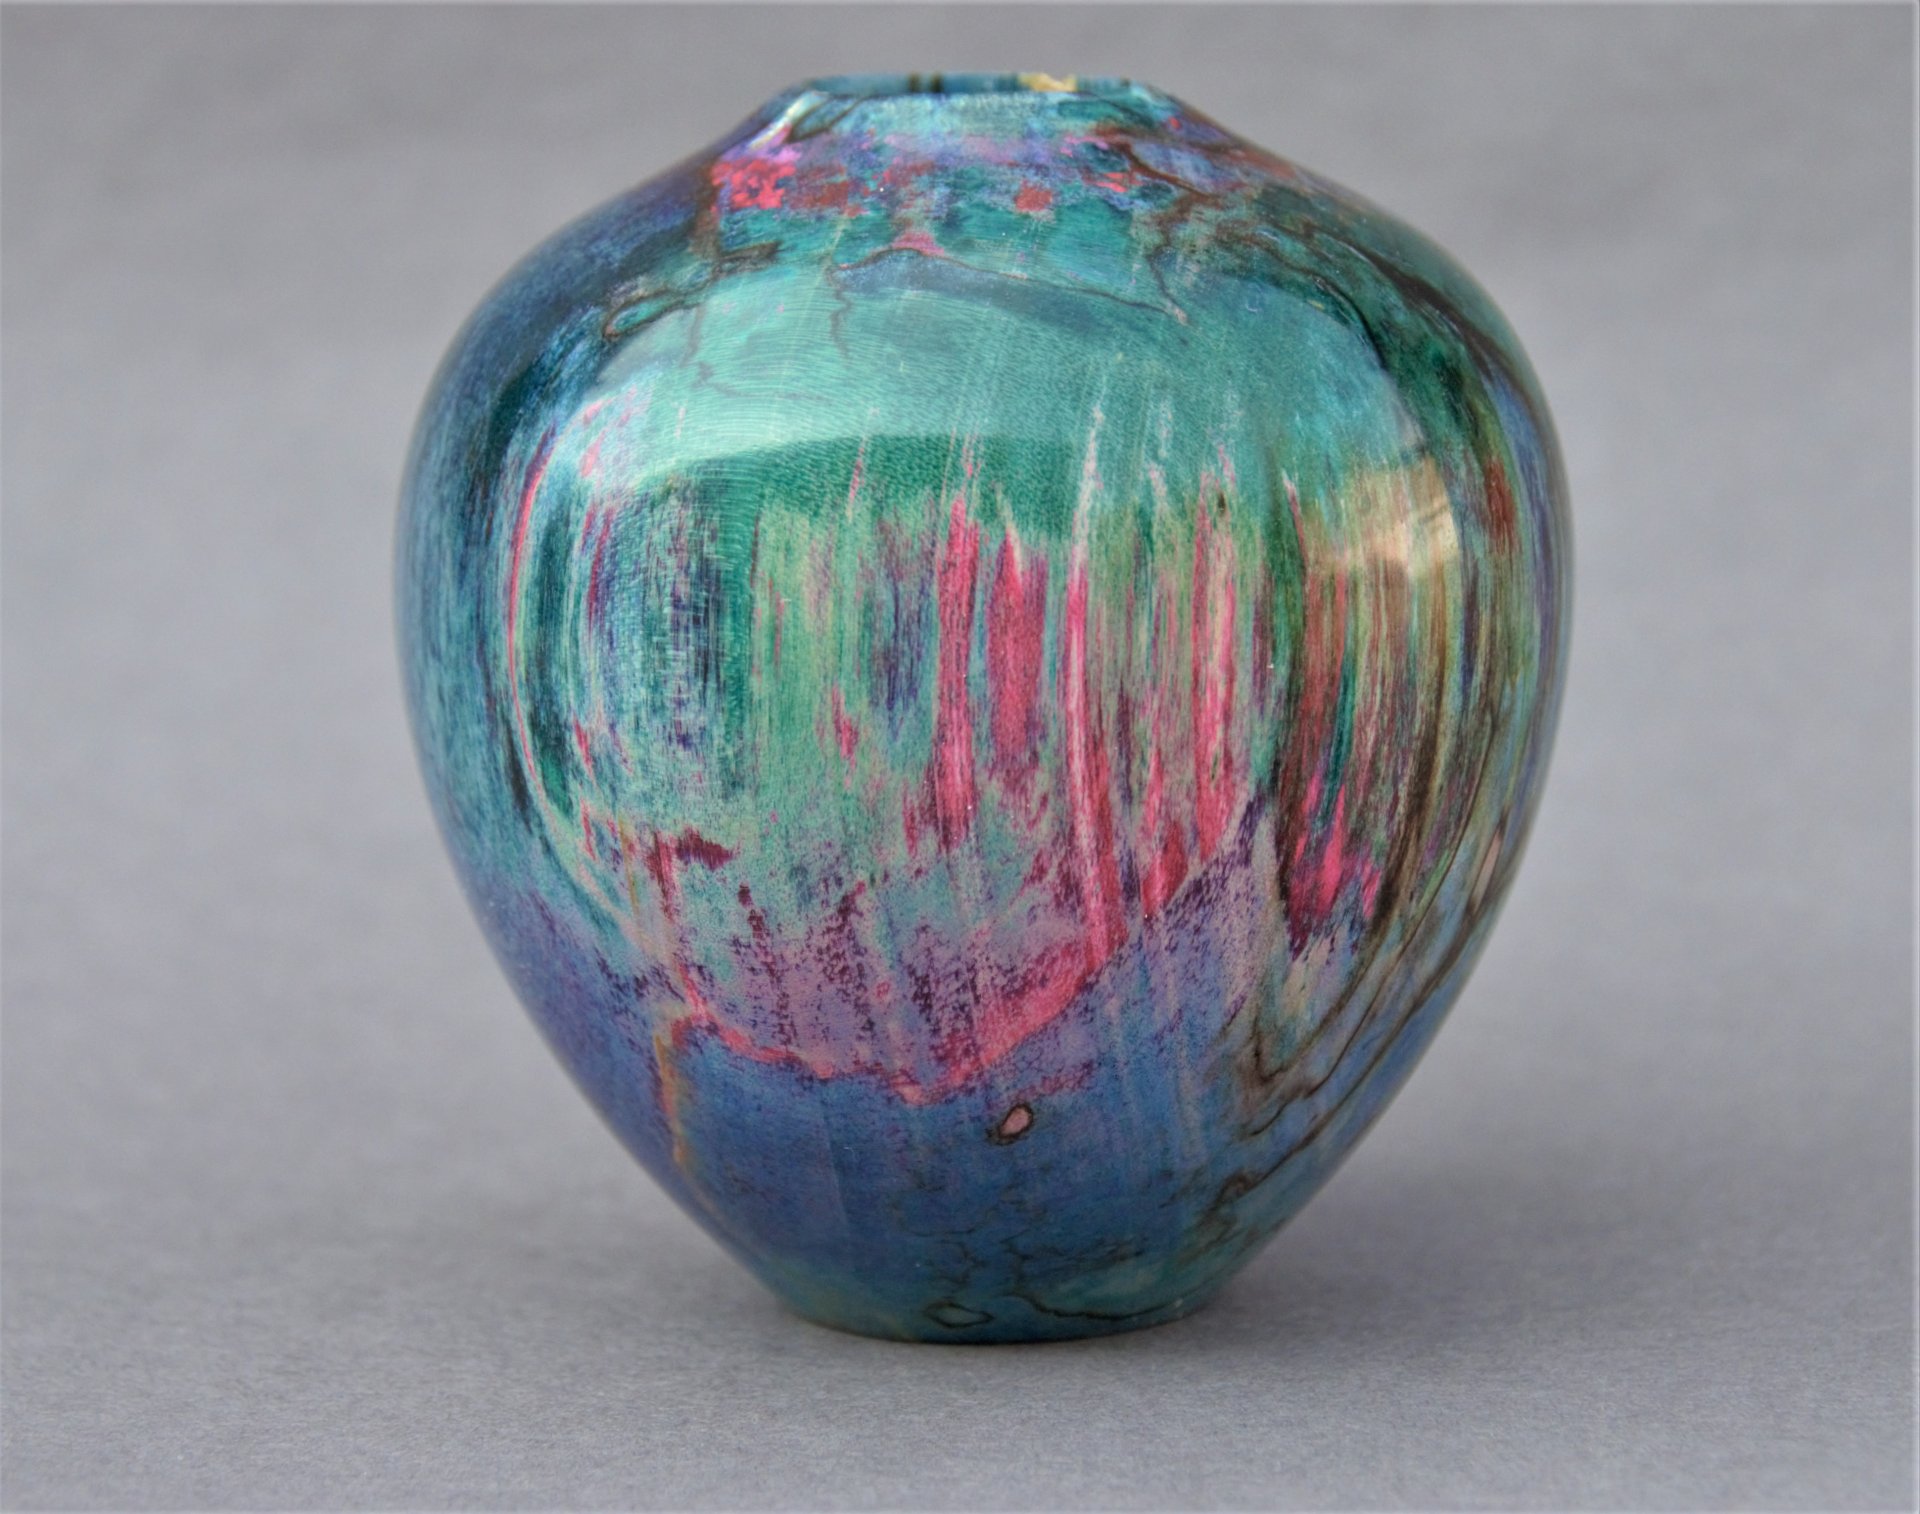 Triple dyed and stabilized hollow form